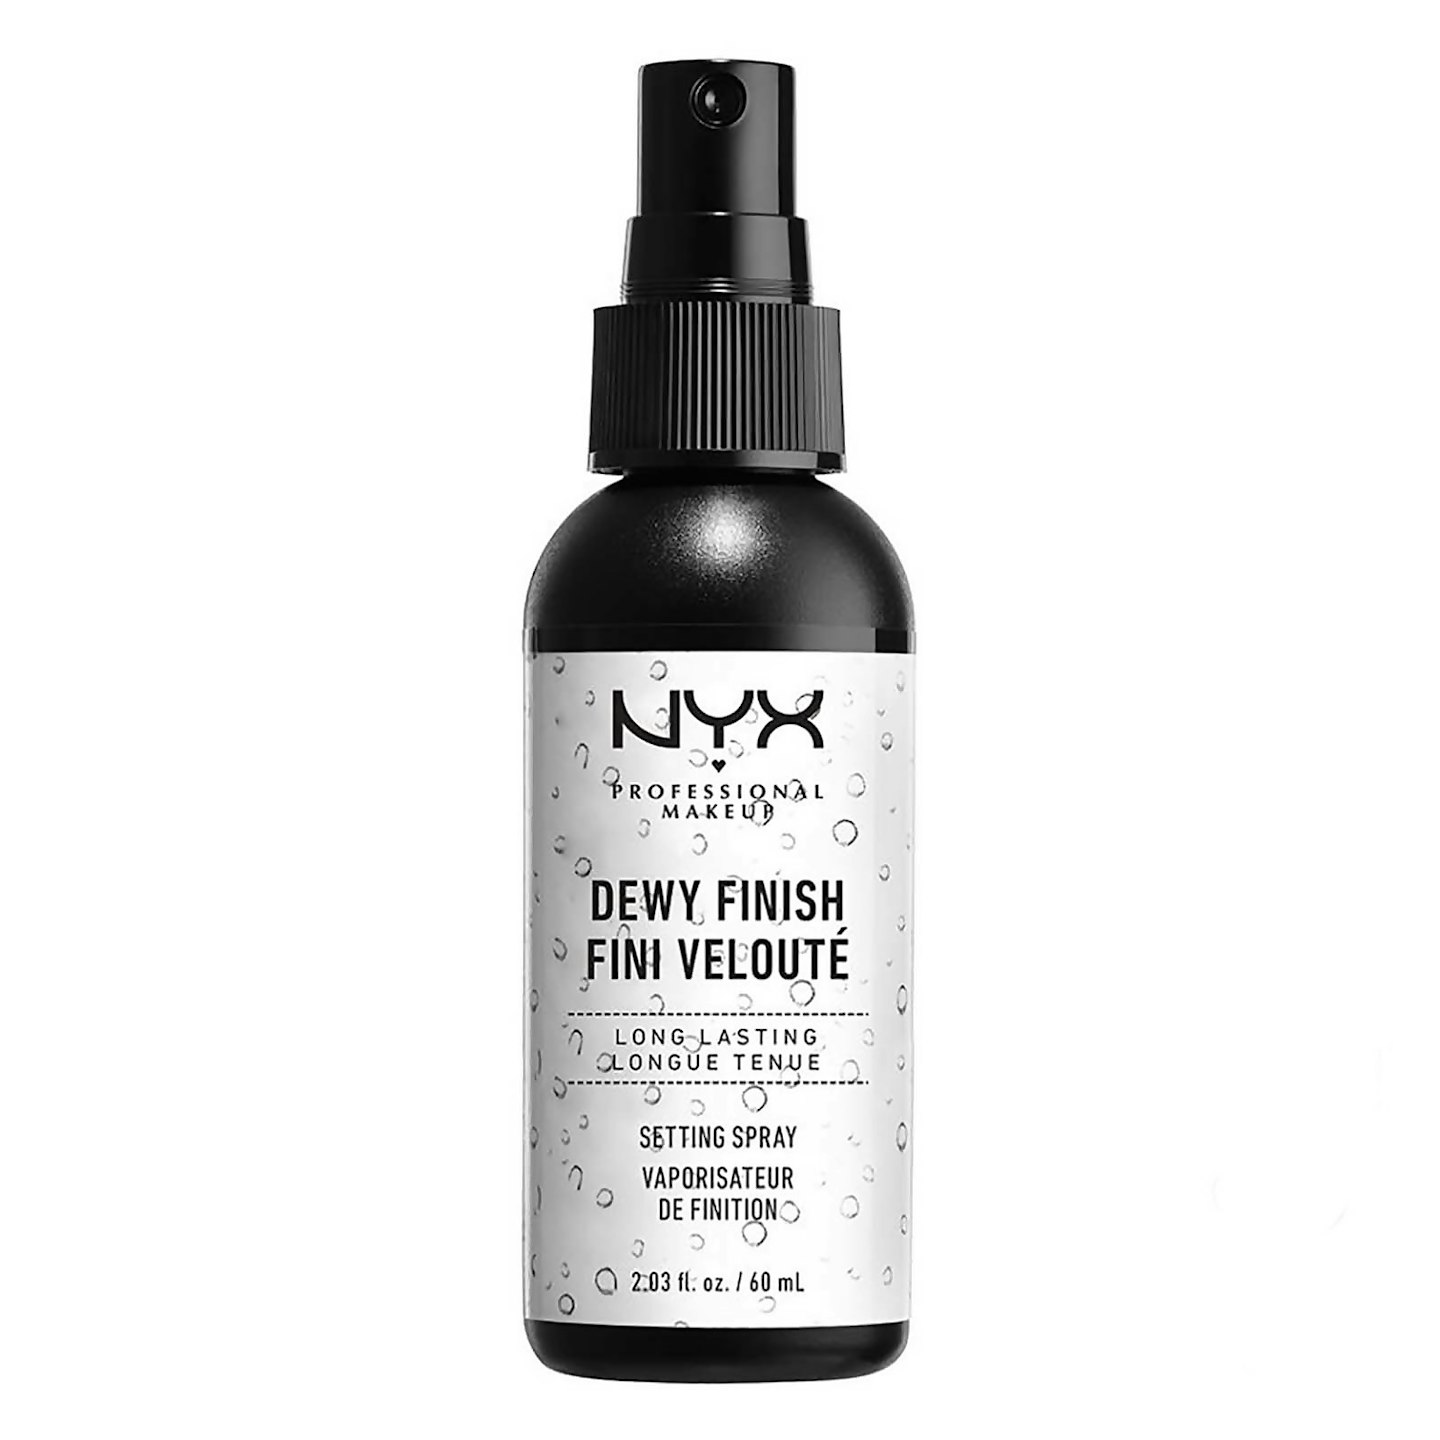 Description Help your makeup stay in place all day or night, with the NYX Professional Makeup Dewy Finish Vegan Setting Spray. The lightweight, vegan formulation is easy to apply and will keep your makeup looking fresh for as long as you need it to. The shine-free, dewy finish gives your makeup a day-long glow whilst boosting the complexion with a quick burst of hydration. Foundation and contour will not fade or budge and oily patches become a thing of the past. The must-have setting spray will become an invaluable addition to your makeup collection and ensure you always look perfect, no matter what the day throws at you.  Cruelty-free and suitable for vegans.   Product Details Brand: NYX Professional Makeup Directions: Spray directly over face after applying makeup.  Ingredients: Water / Aqua / Eau, Alcohol, Propylene Glycol, PVP, Phenoxyethanol, Disodium EDTA, Niacinamide.  Volume: 60ml NYX Professional Makeup Setting Spray, £5.60